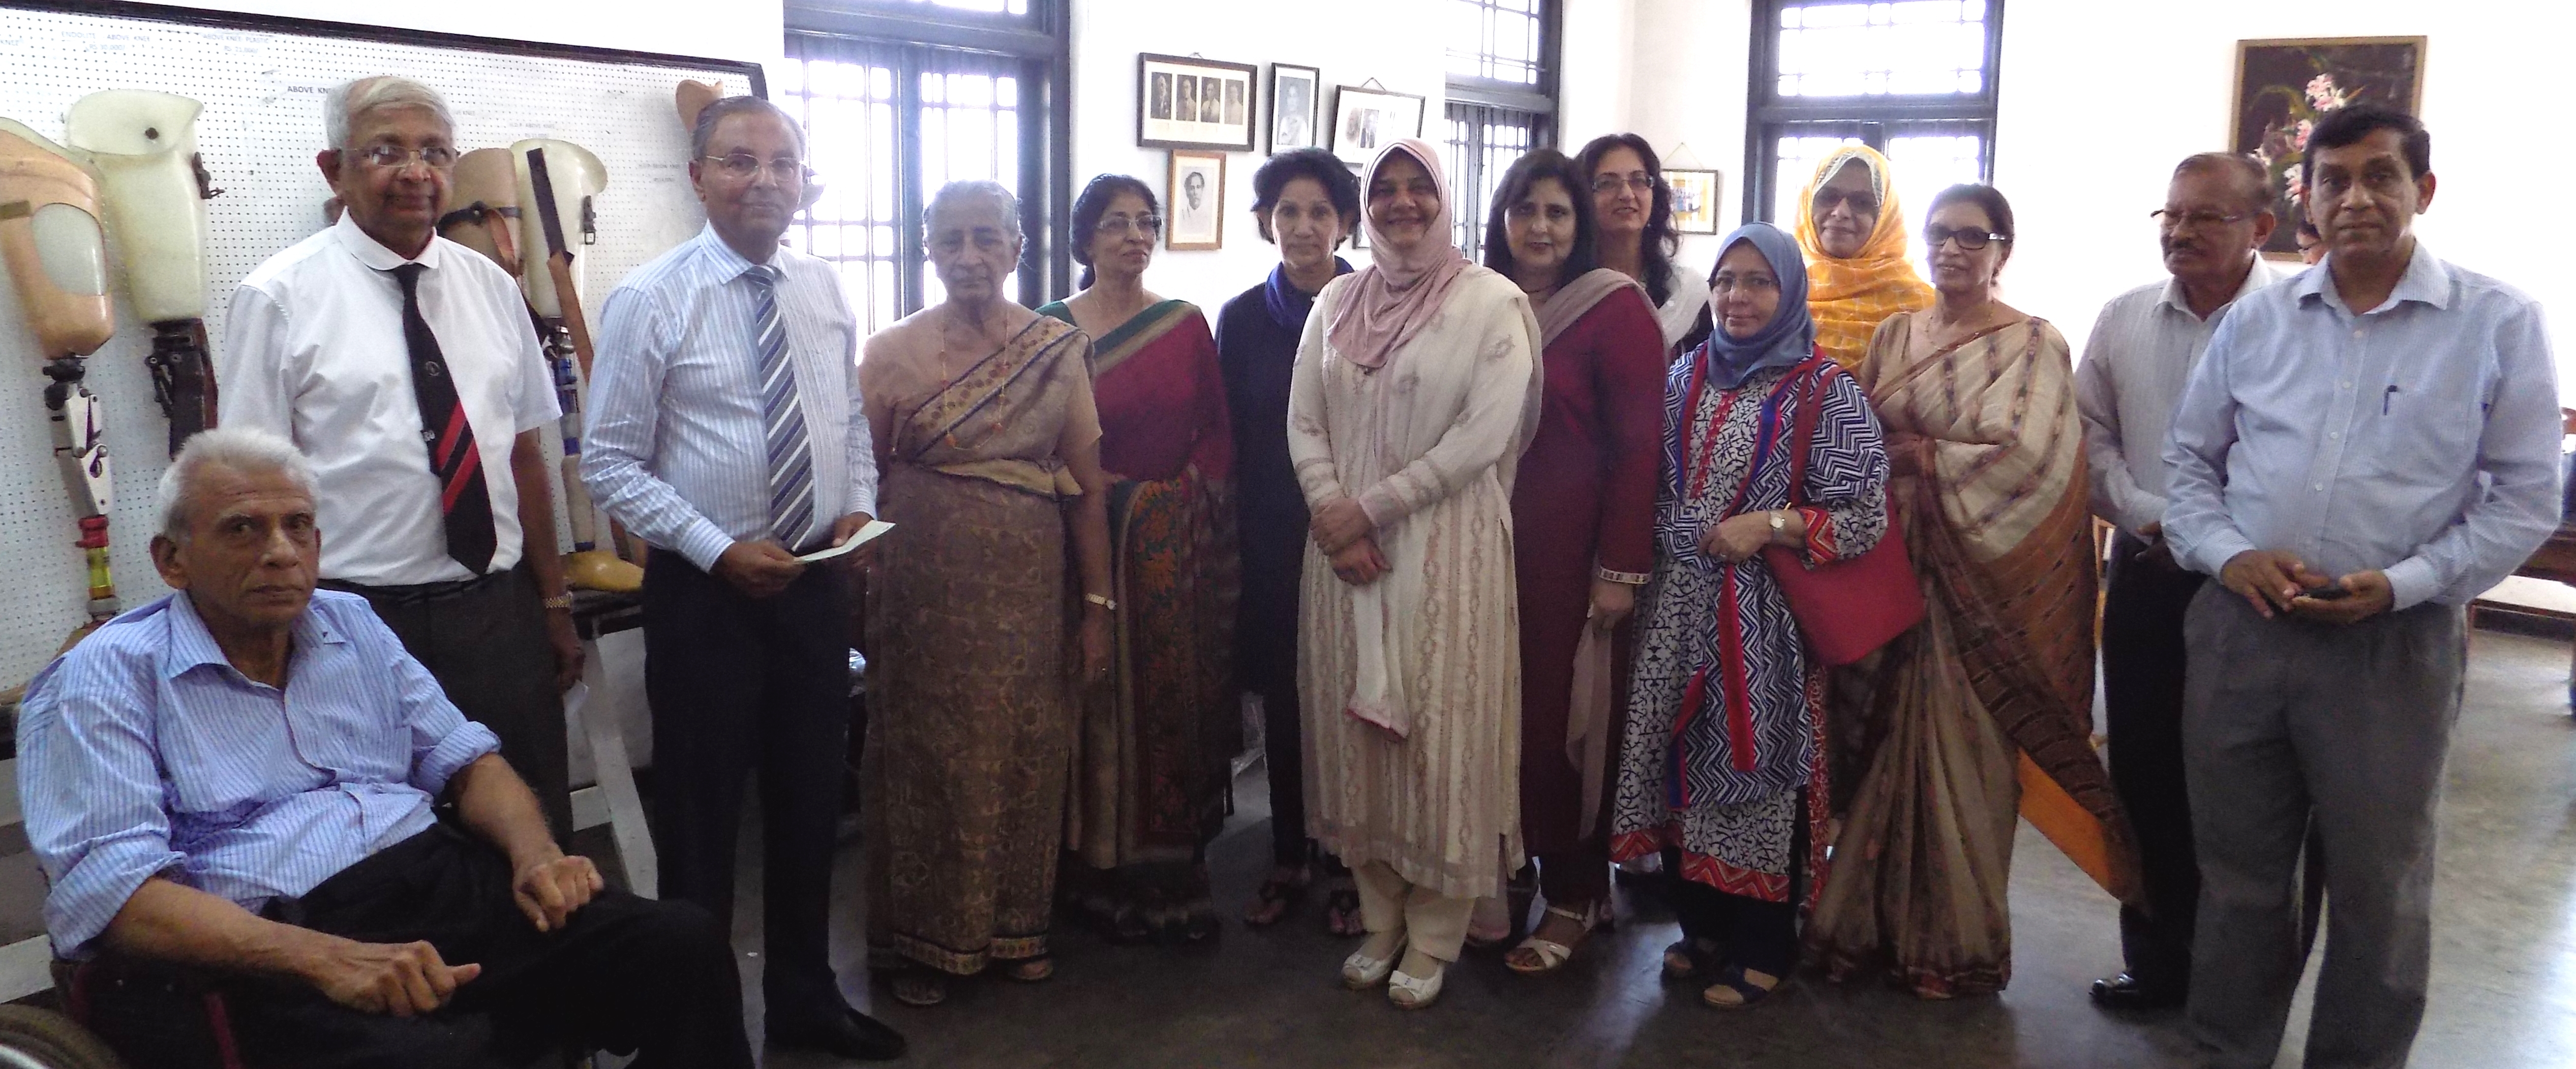 Pak Women reaches out to assist physically challenged Sri Lankans